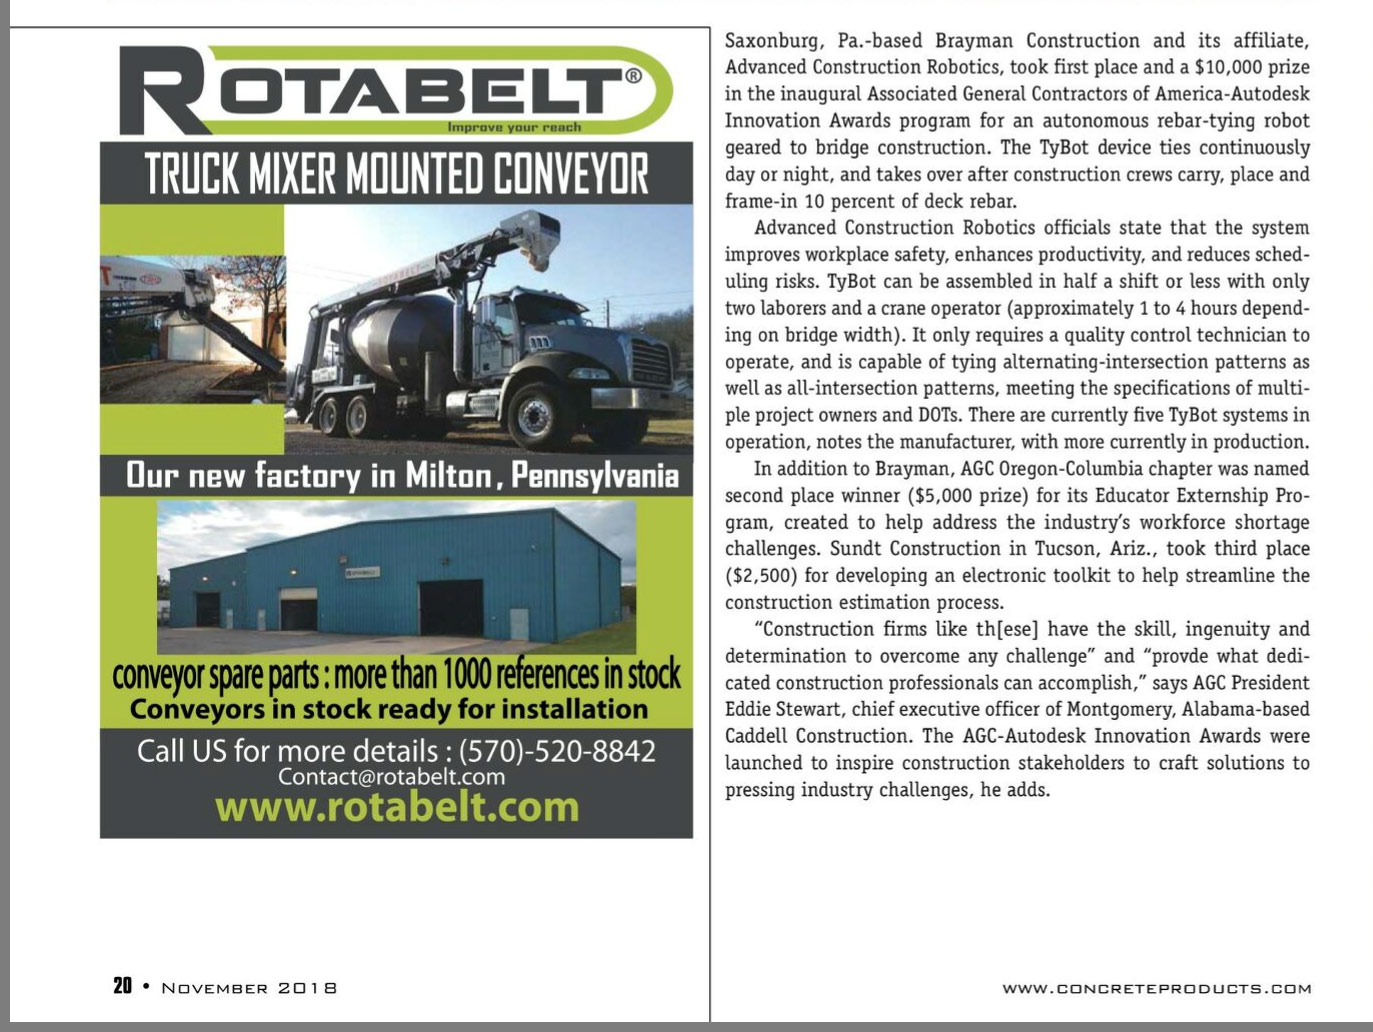 Rotabelt Ad in Concrete Products Issue November 2018